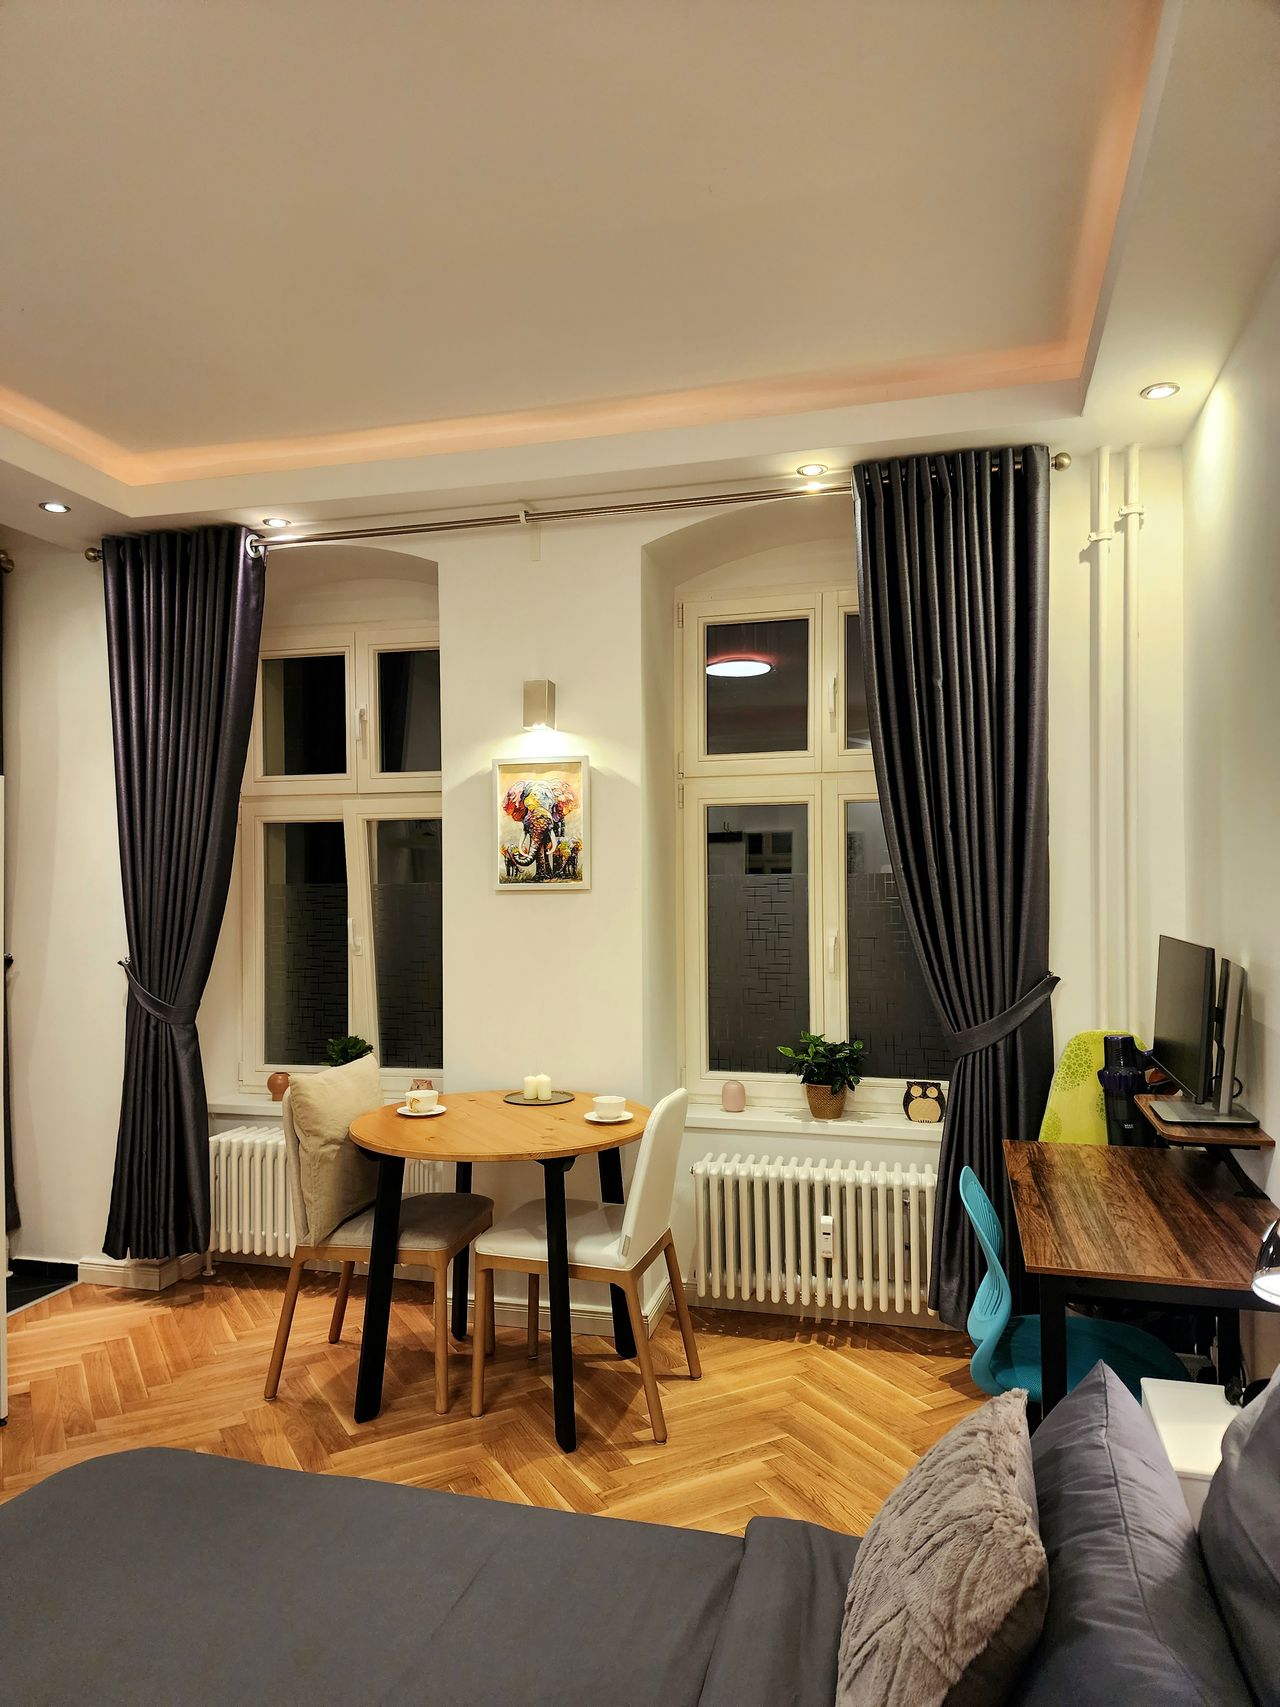 Modern and stylish studio apartment centrally located in “Berlin Mitte”, Torstraße